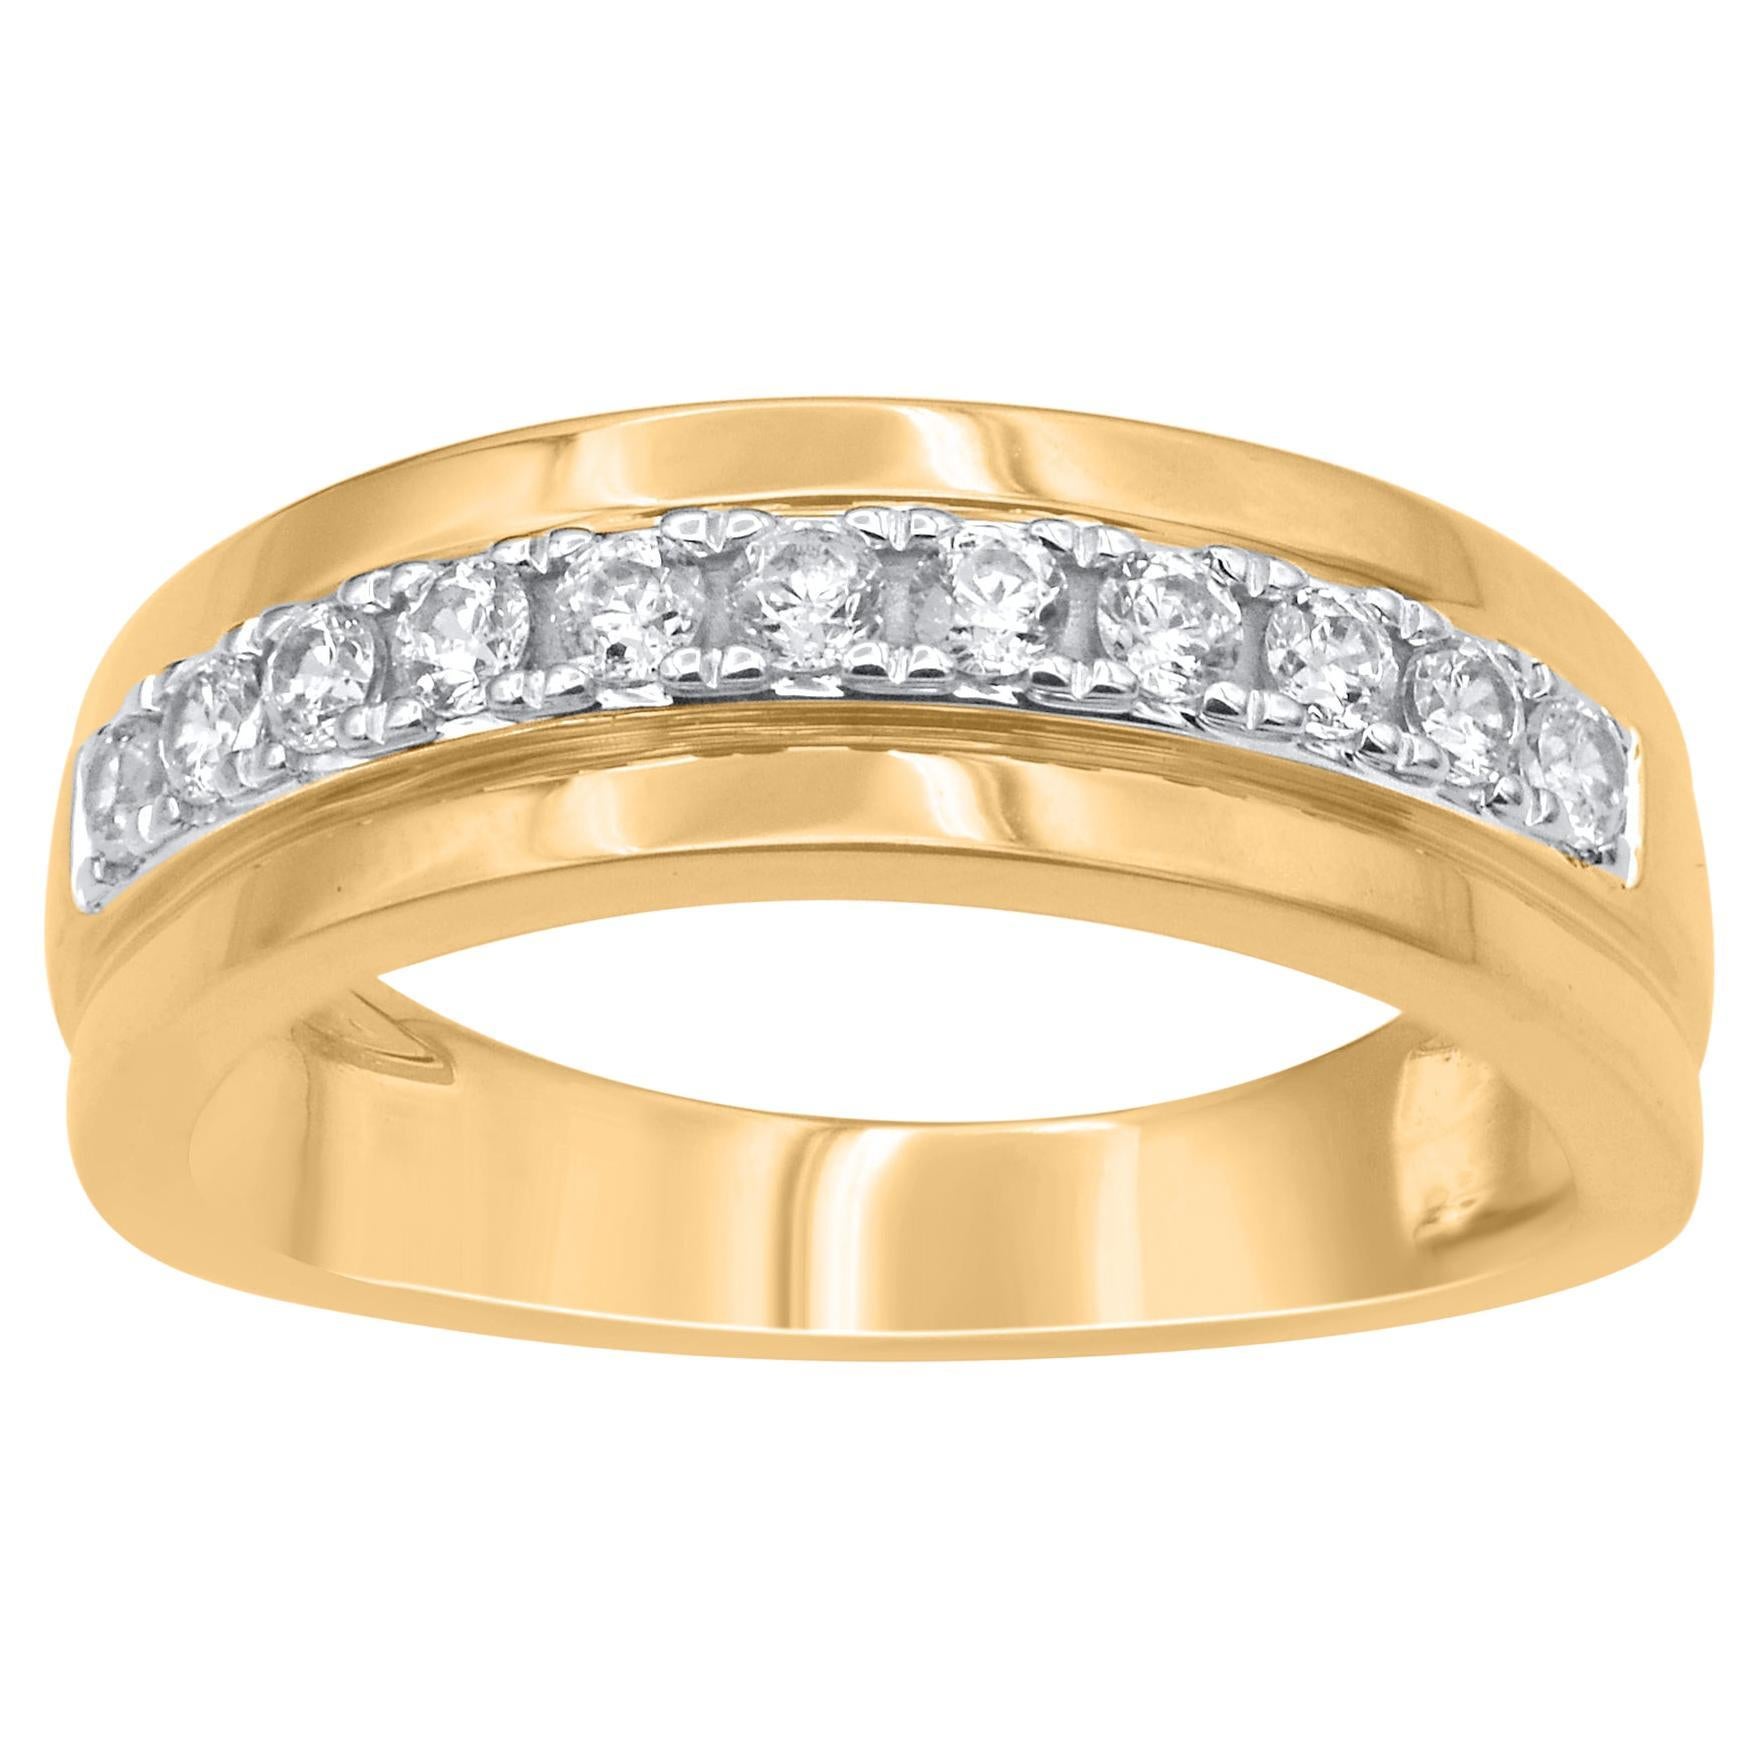 TJD 0.50 Carat Brilliant Cut Natural Diamond 18KT Yellow Gold Men's Band Ring For Sale